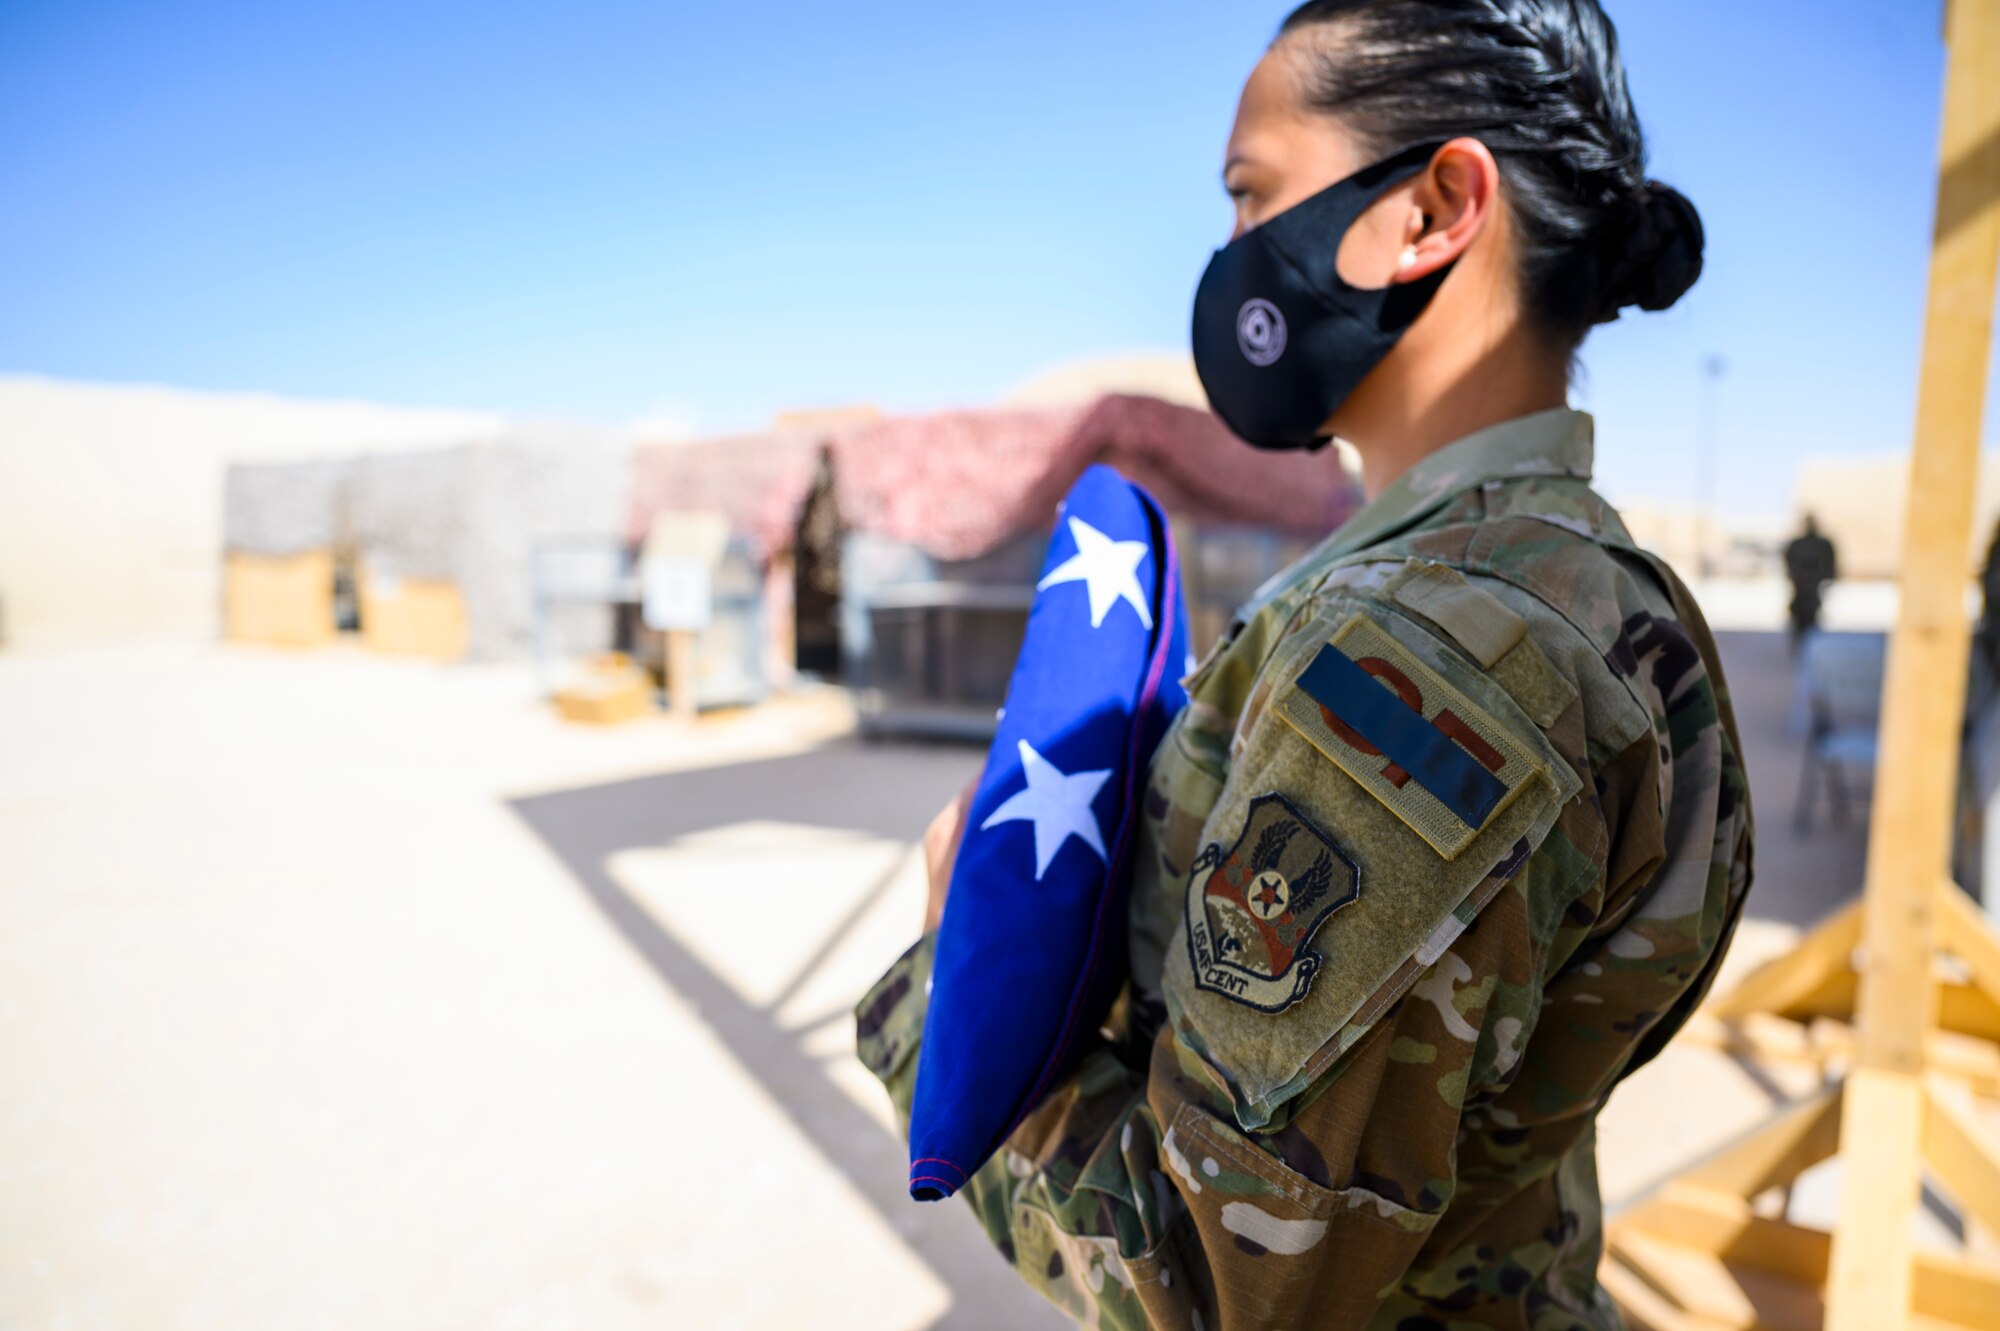 Staff Sgt. Aubrey Houston, 378th Expeditionary Security Forces Squadron defender, holds the flag during a Remembrance Ceremony Sept. 11, 2021, at Prince Sultan Air Base, Kingdom of Saudi Arabia.